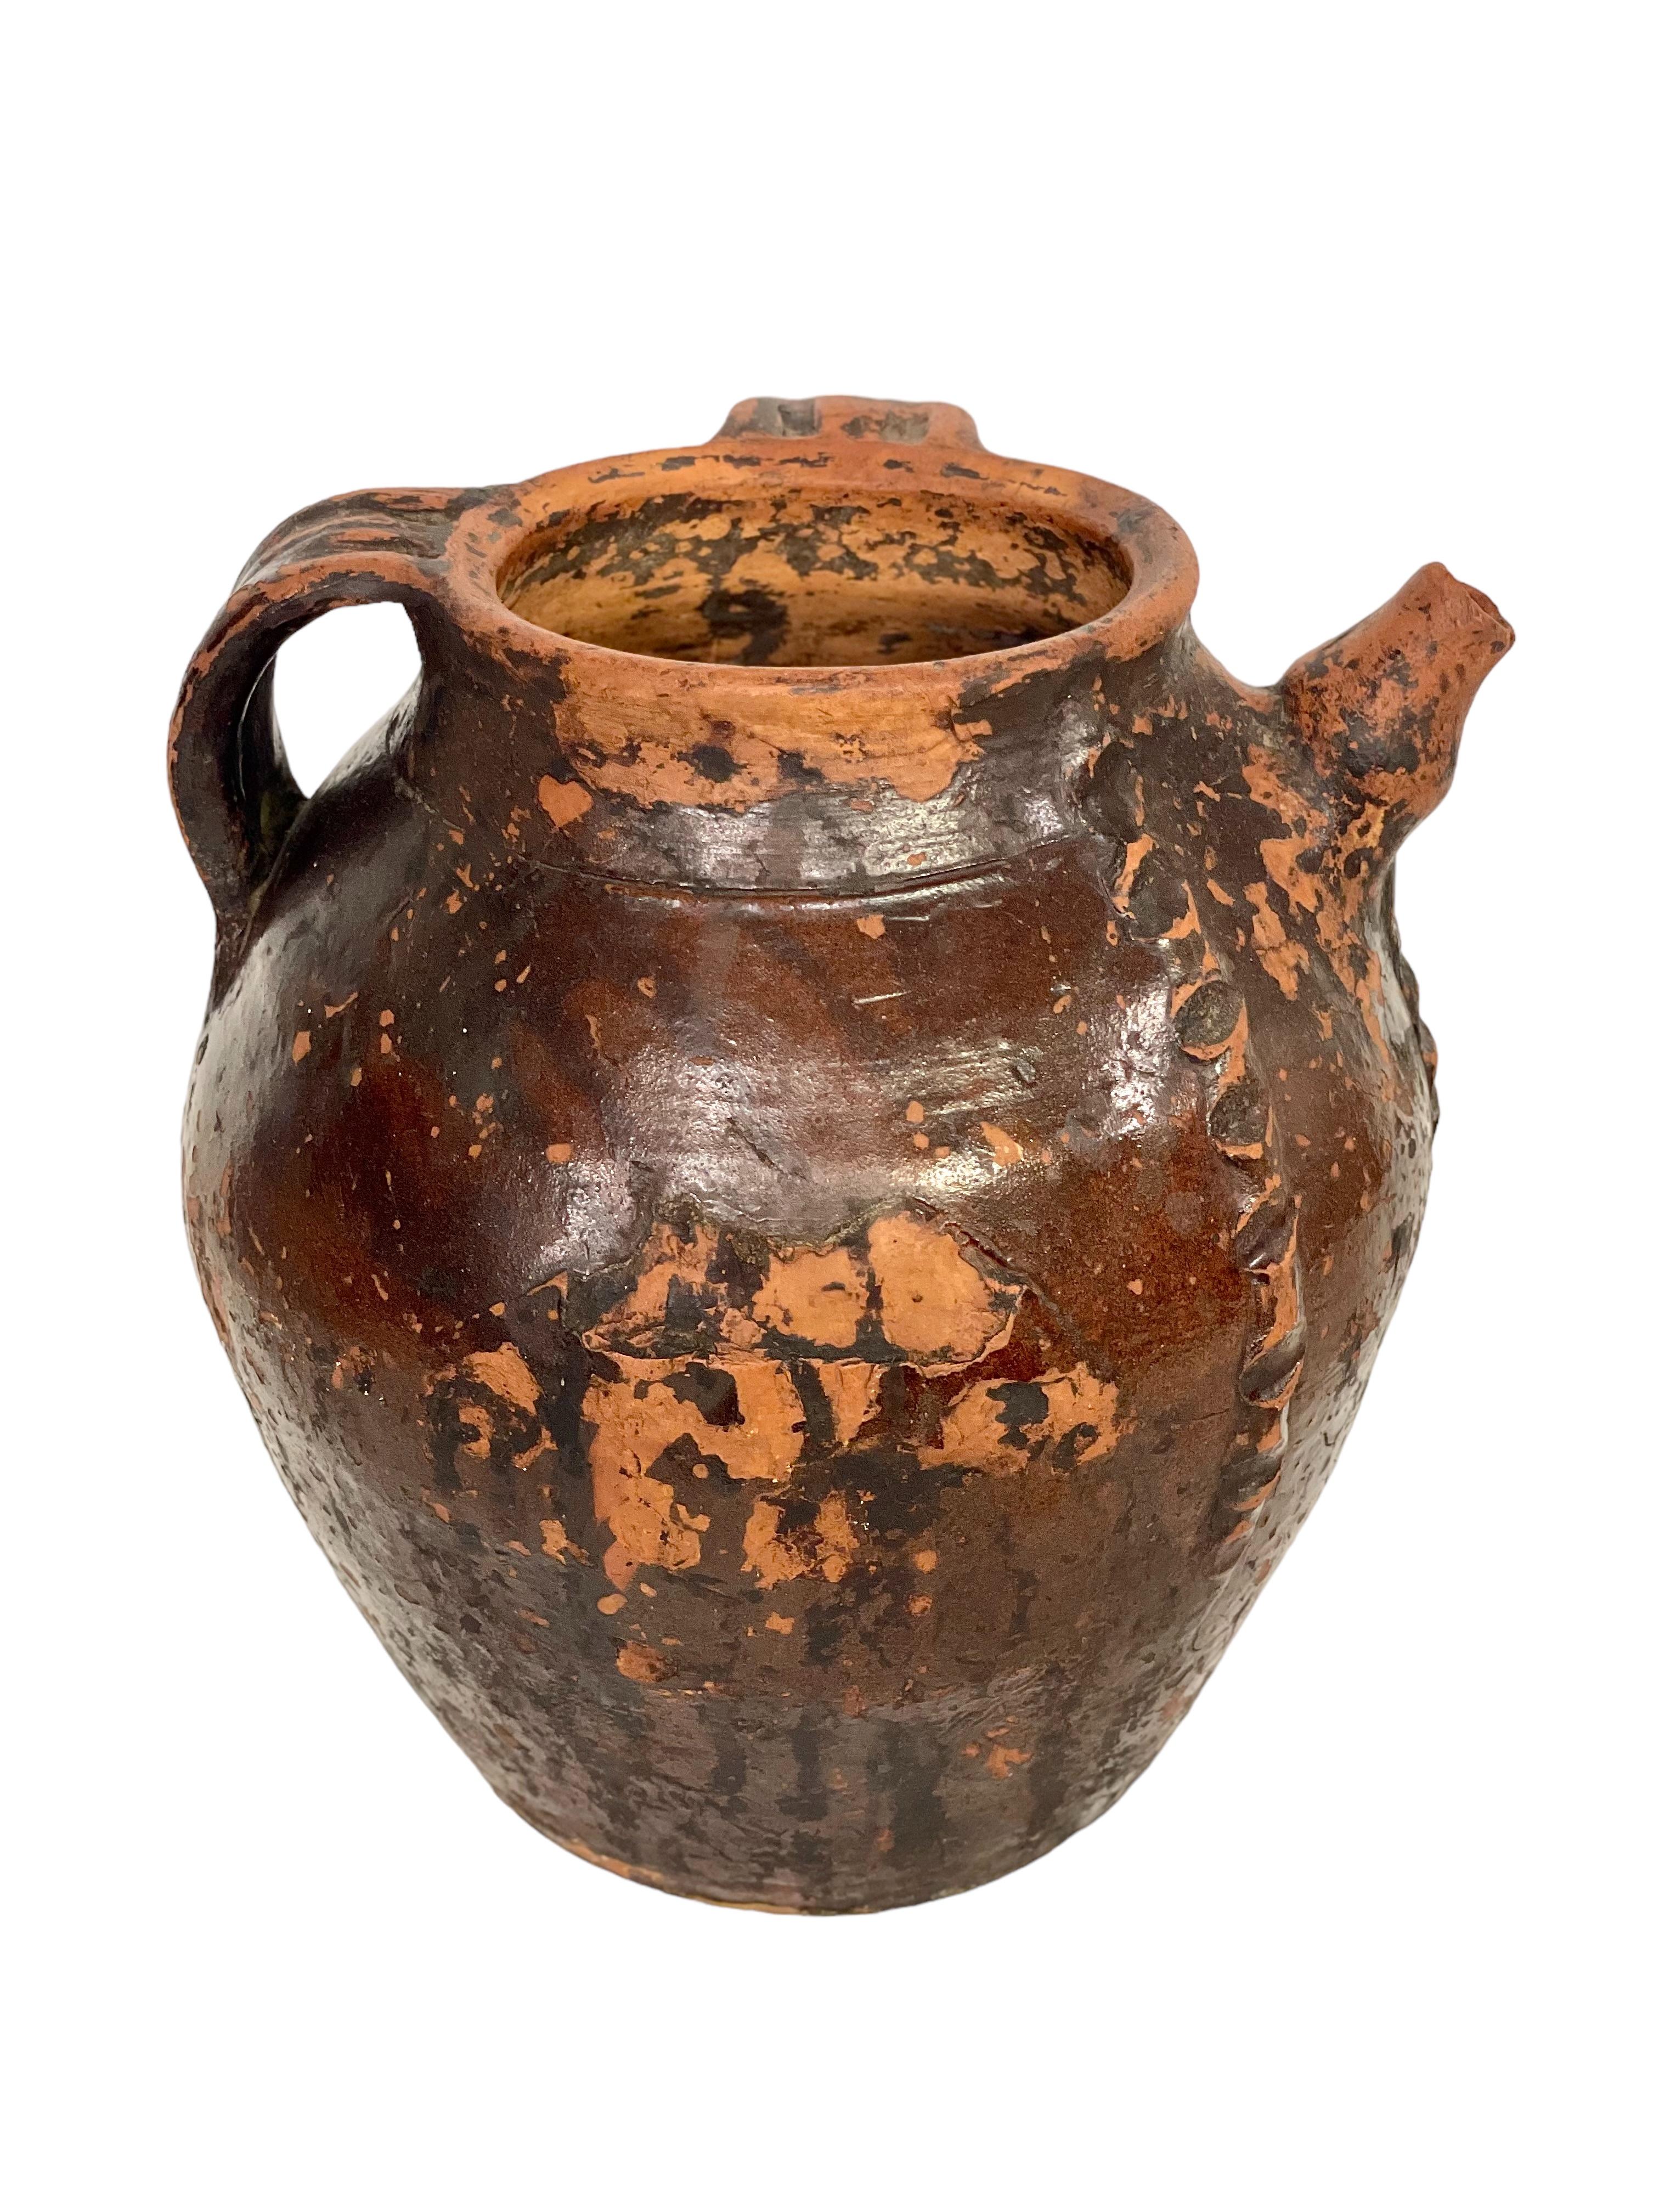 A large and very handsome glazed terracotta walnut oil jug, dating from the 18th century and originating from the south of France. Featuring two side handles and a single pouring spout, this beautiful vessel is covered with a gorgeous